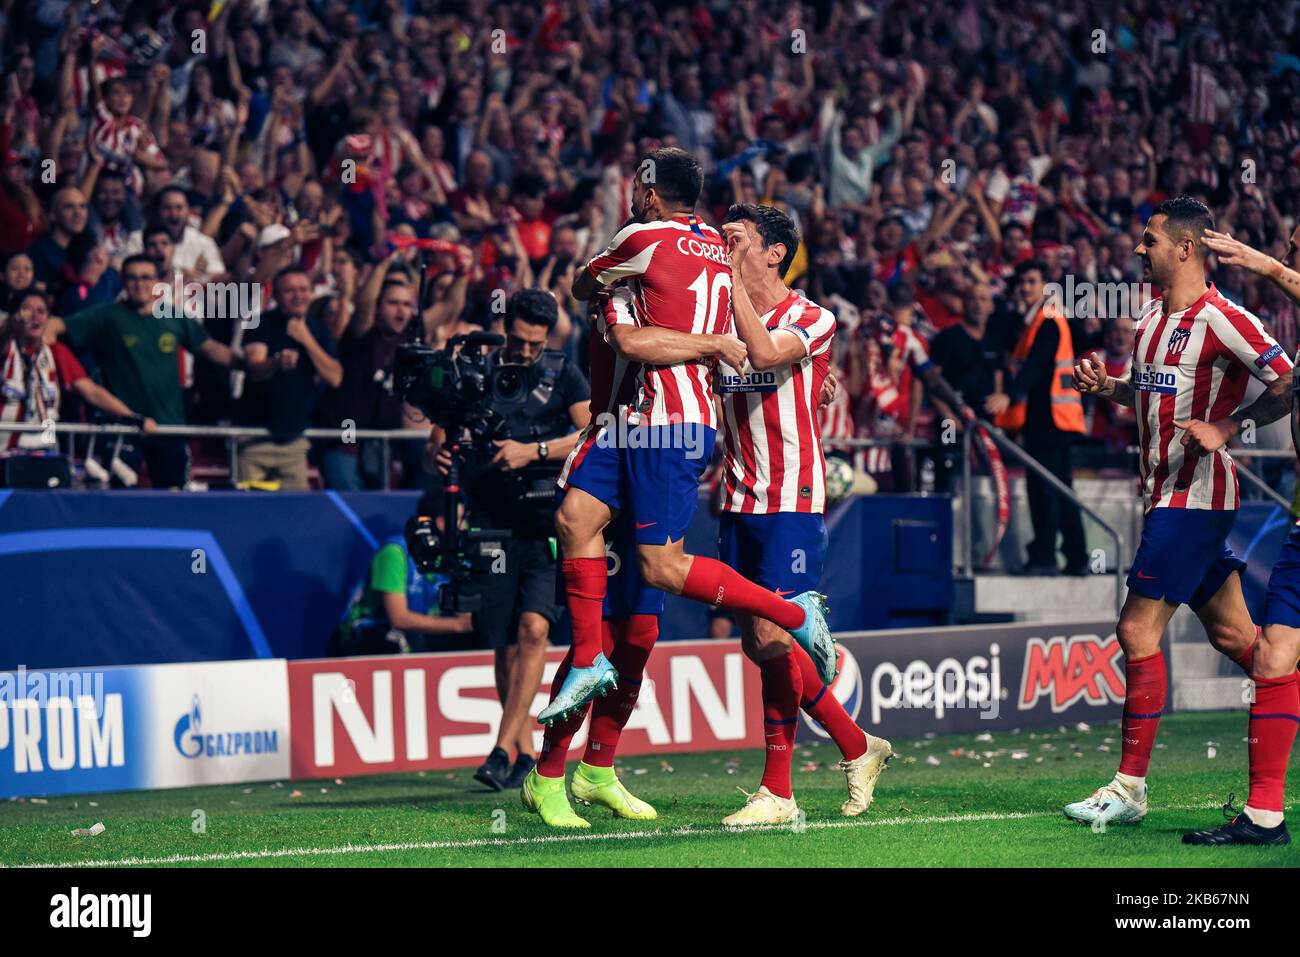 Hector Herrera and Angel Correa celebrates a goal during the UEFA Champions League group D match between Atletico Madrid and Juventus at Wanda Metropolitano on September 18, 2019 in Madrid, Spain. (Photo by Rubén de la Fuente Pérez/NurPhoto) Stock Photo